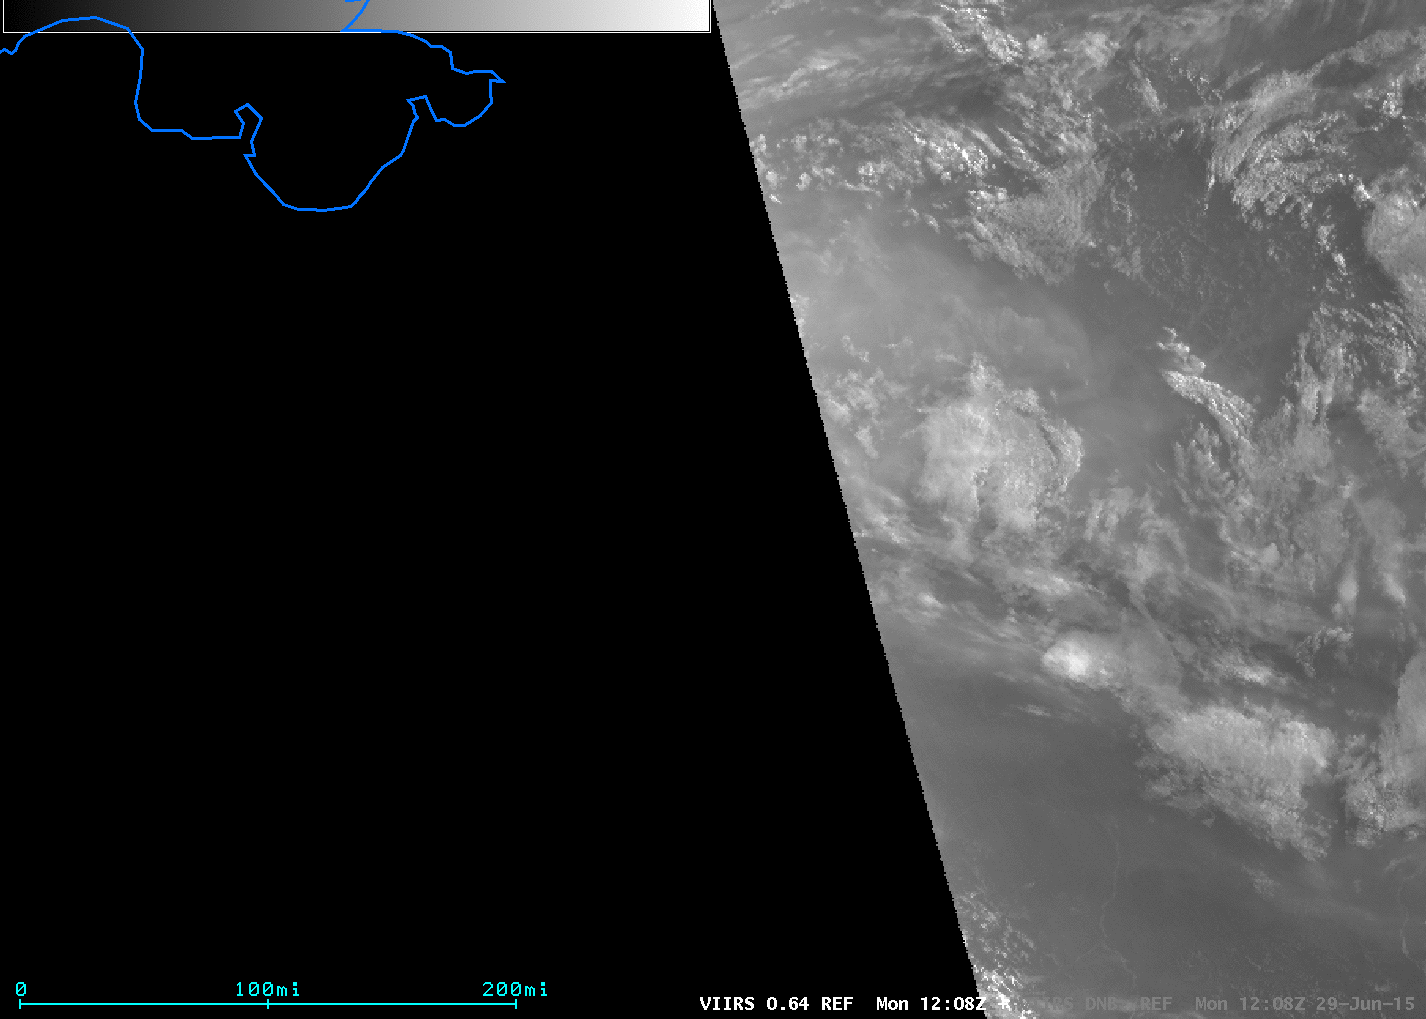 Suomi NPP 0.64 µm visible channel images, times as indicated (click to enlarge)